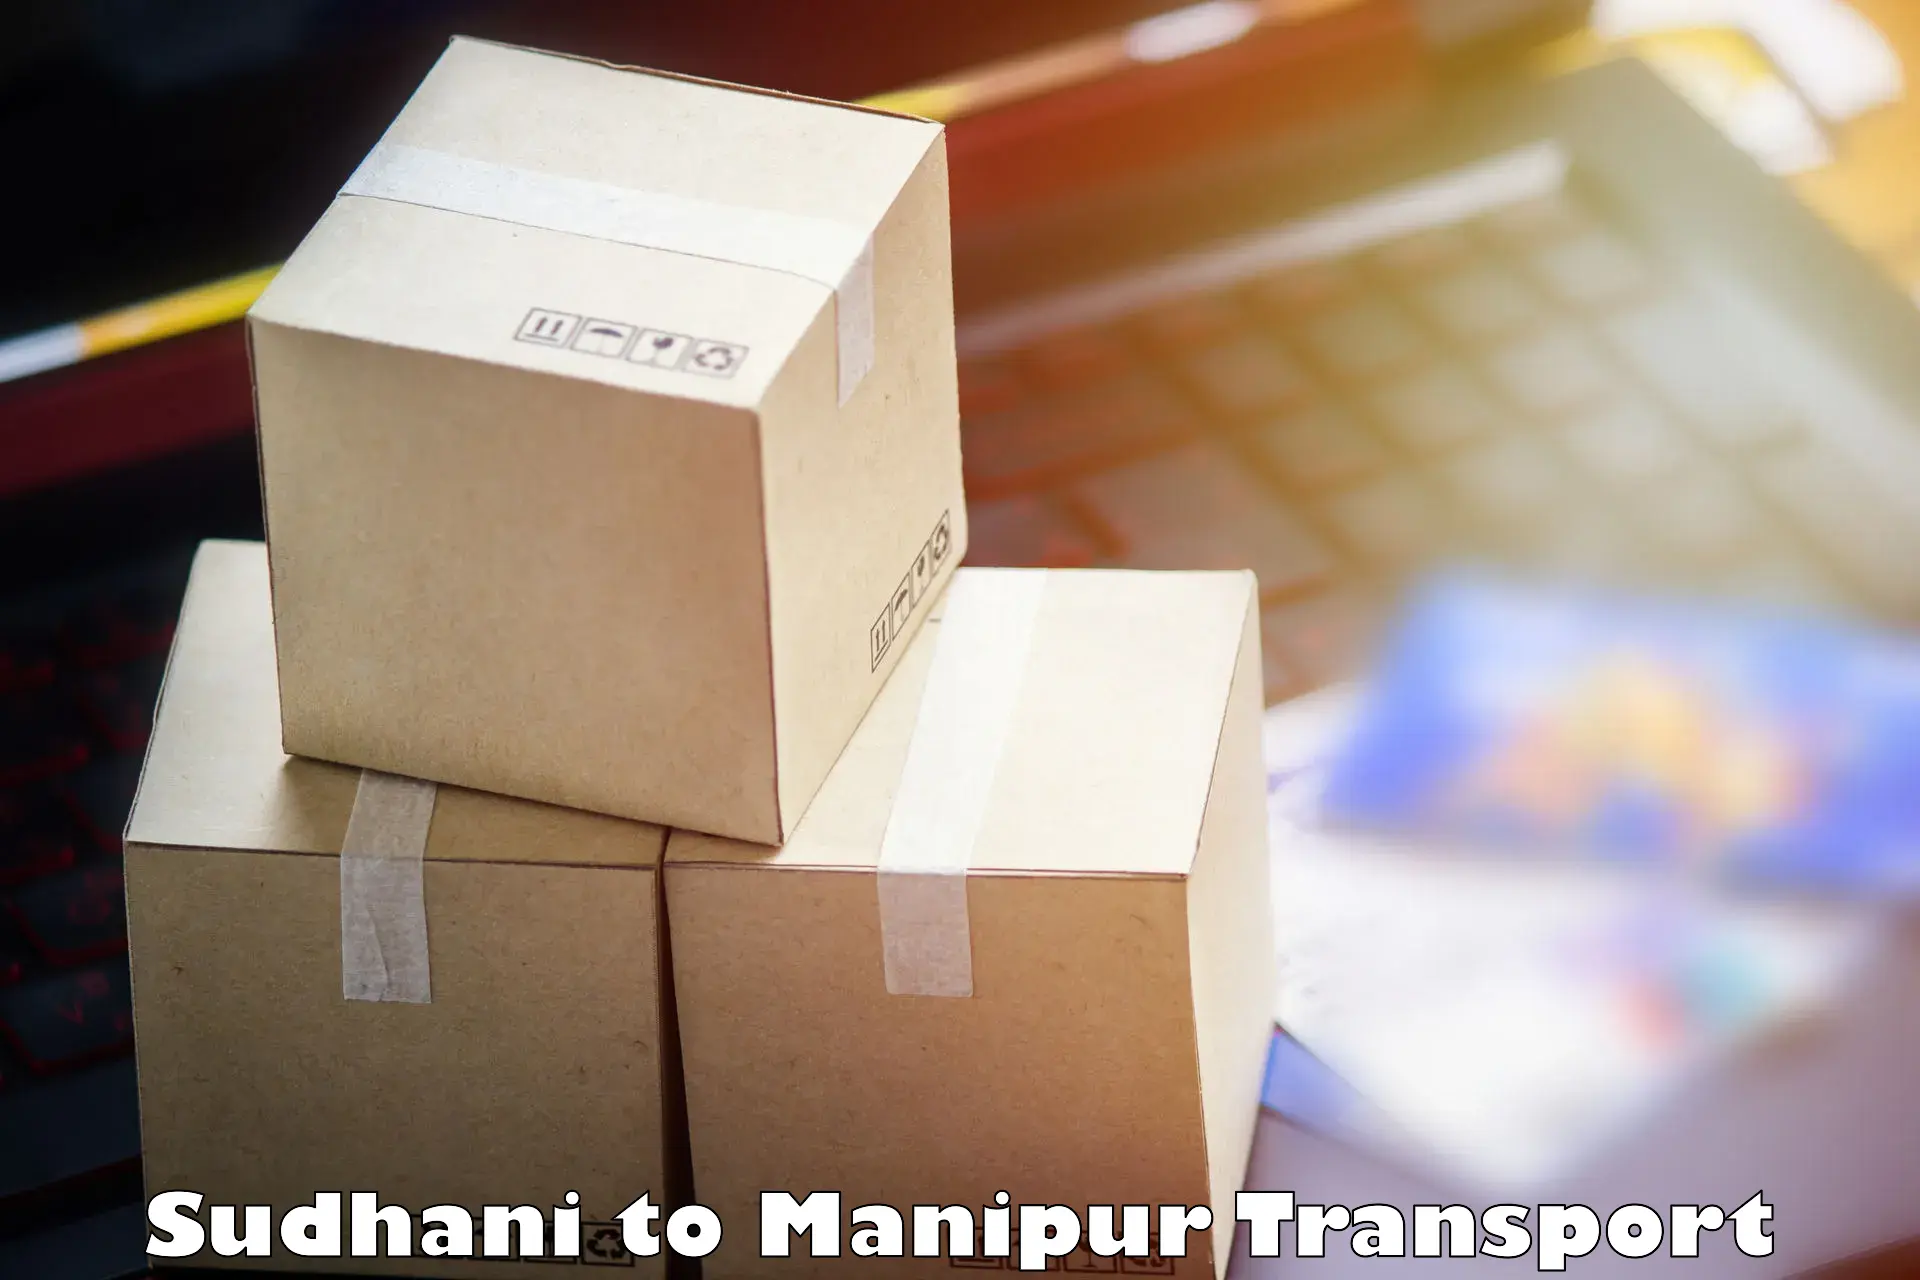 Commercial transport service Sudhani to Manipur